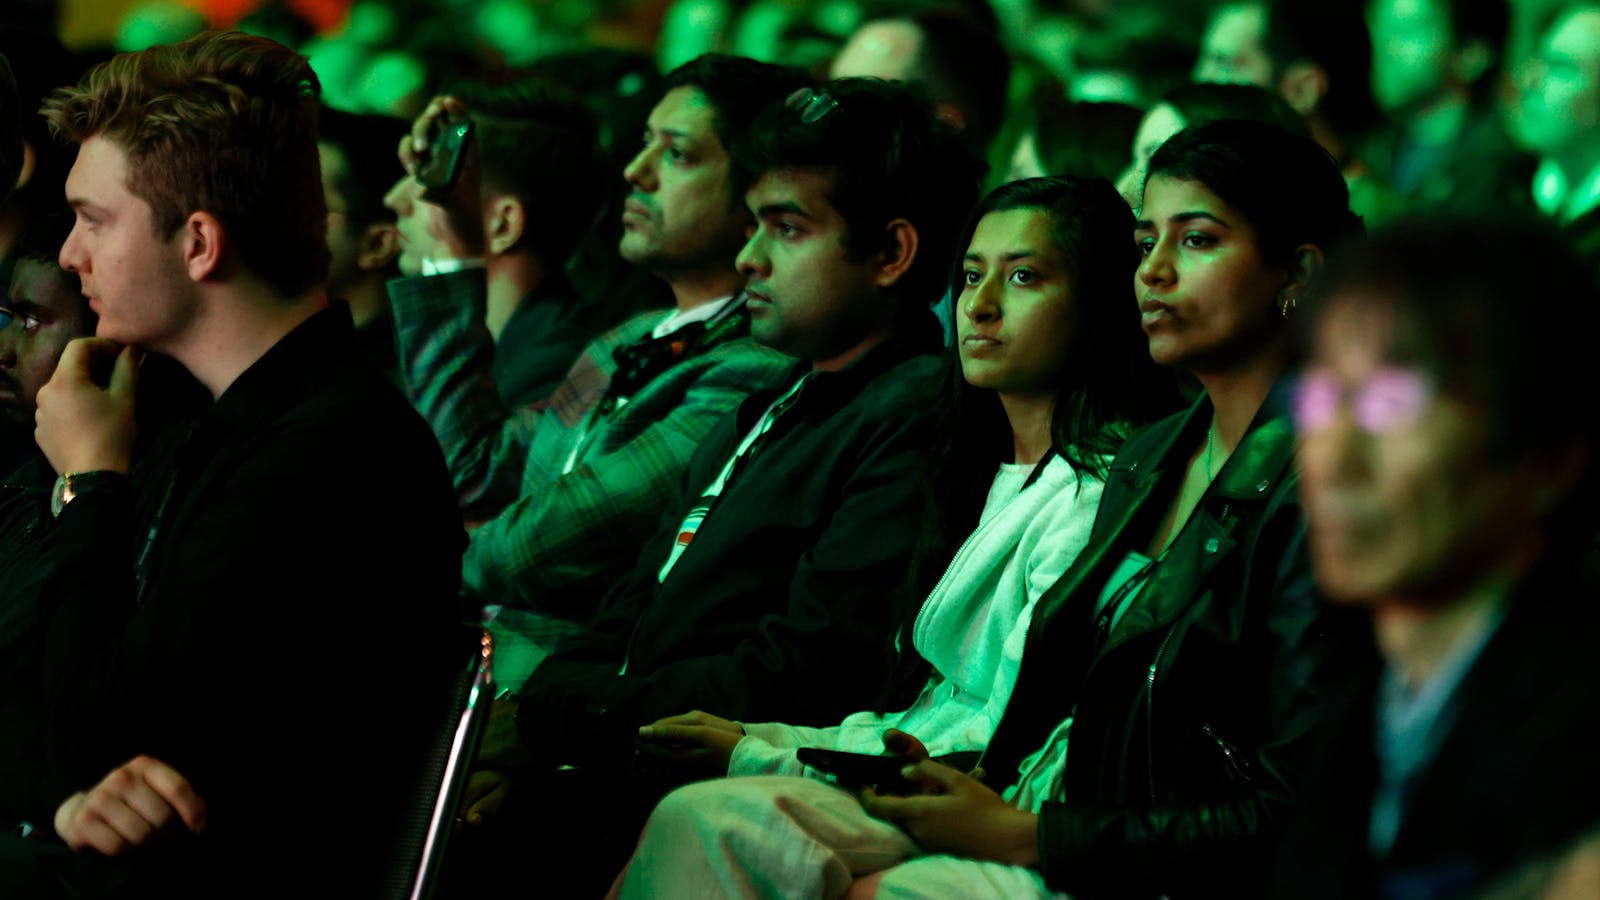 Audience members at TechCrunch Disrupt in San Francisco. Photo: Getty